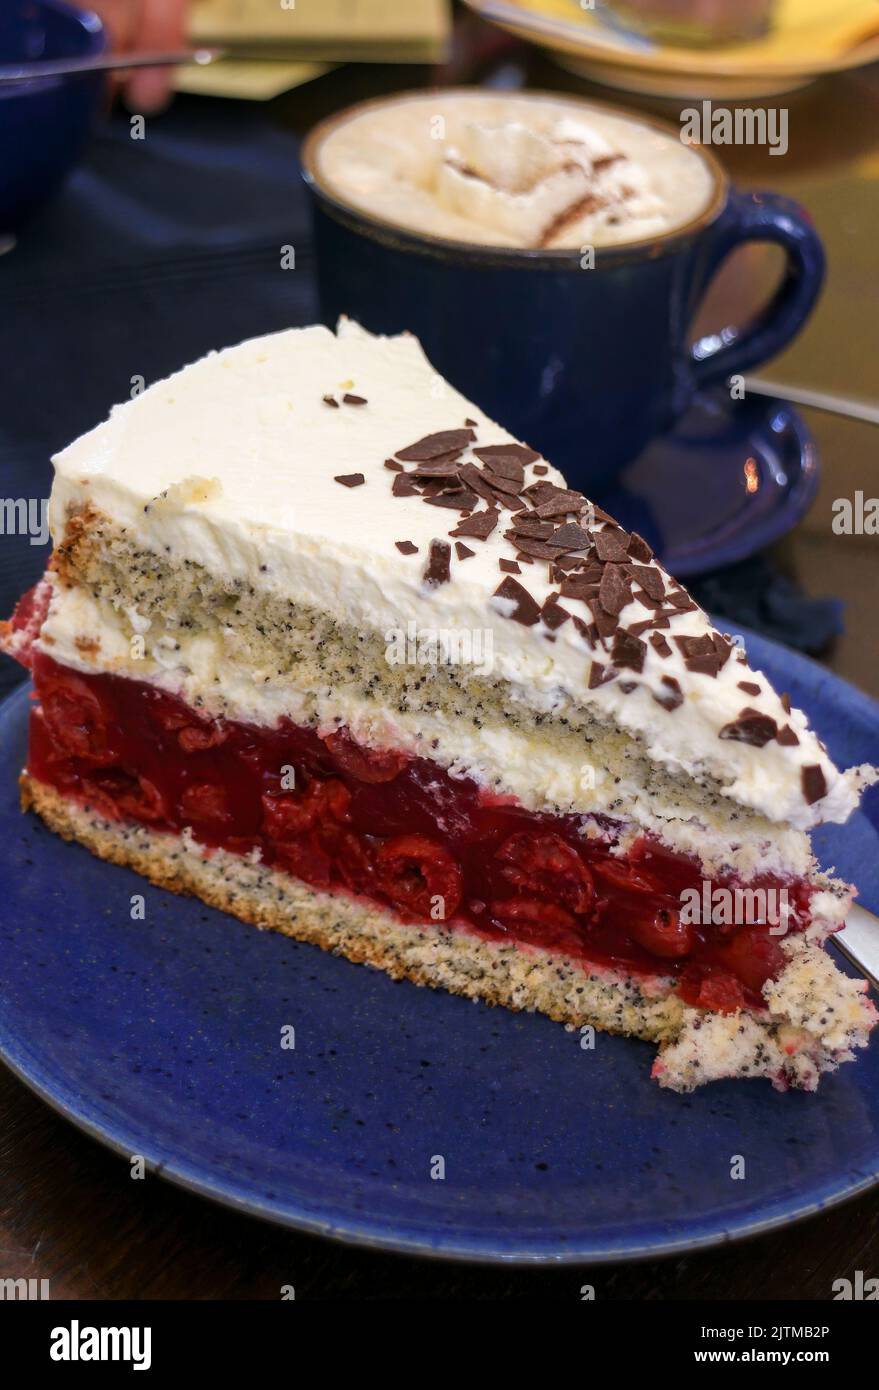 Slice of cherry layer cake with cream and a cup of cappuccino Stock Photo